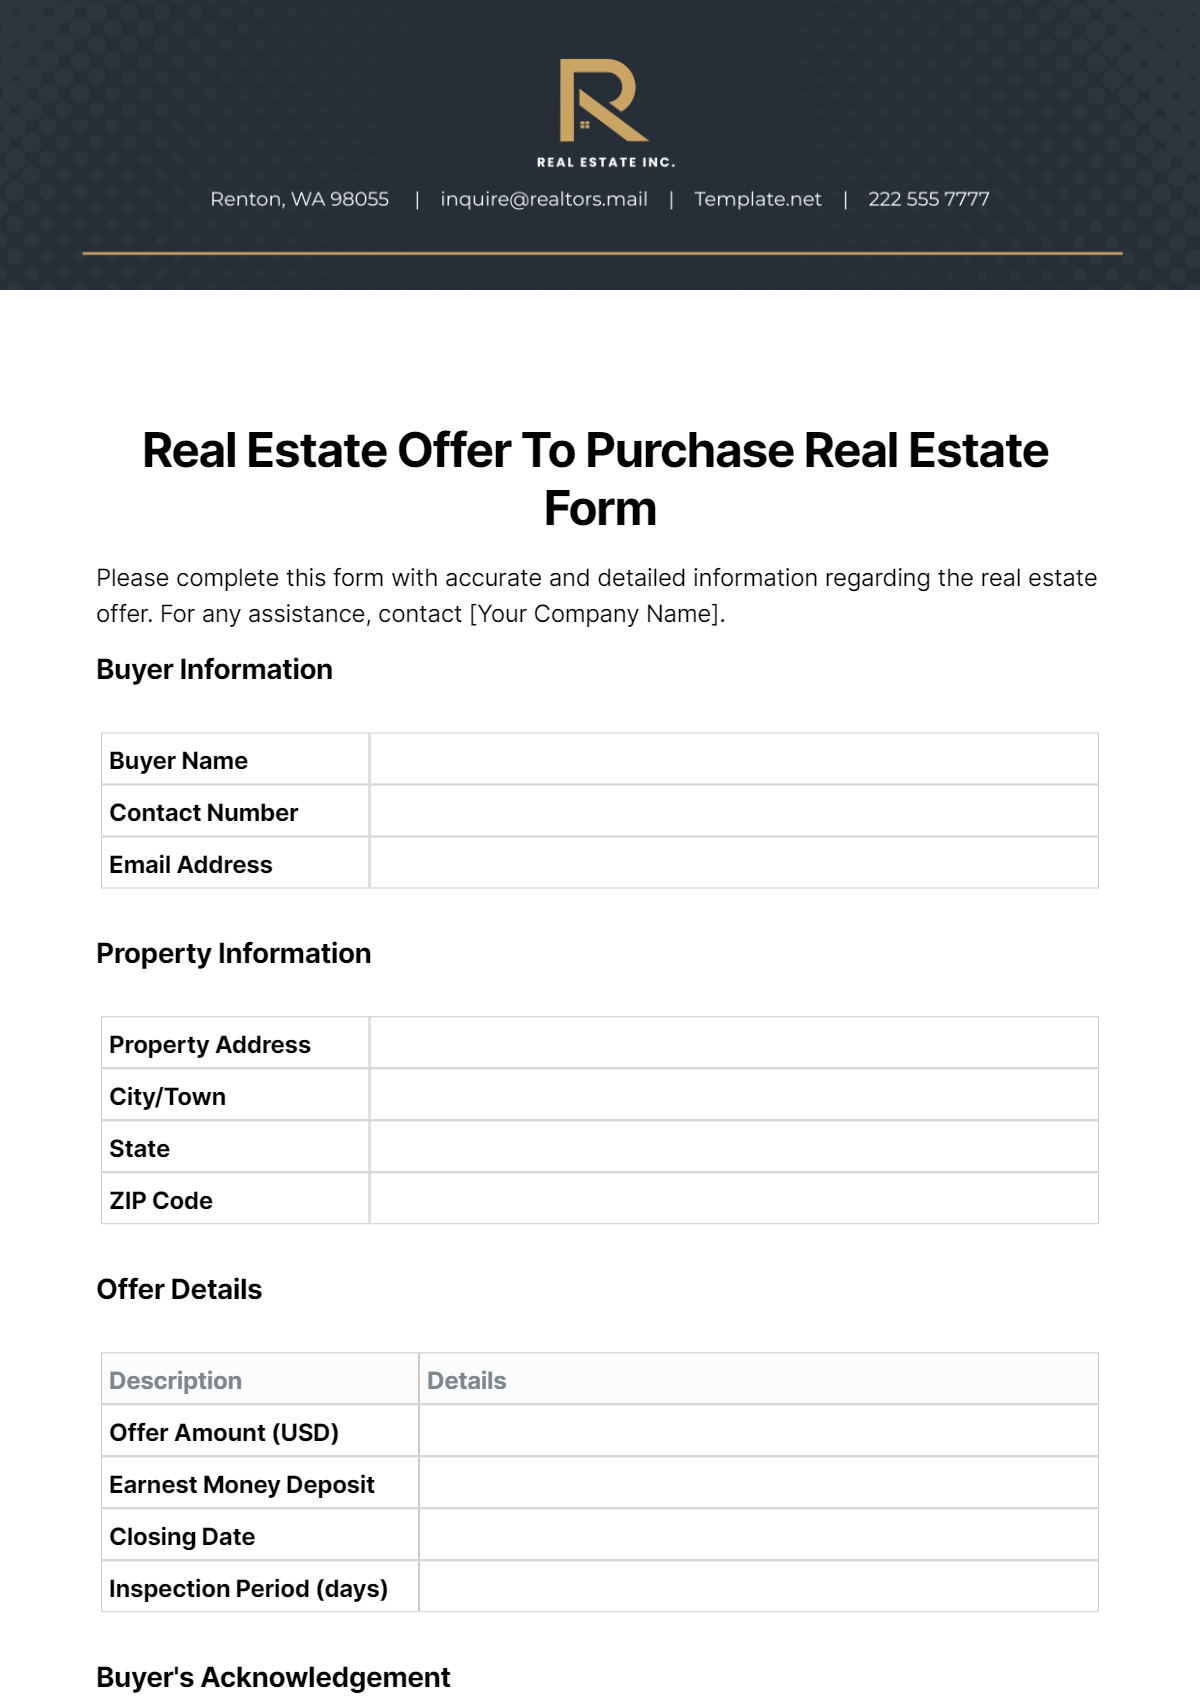 Real Estate Offer To Purchase Real Estate Form Template